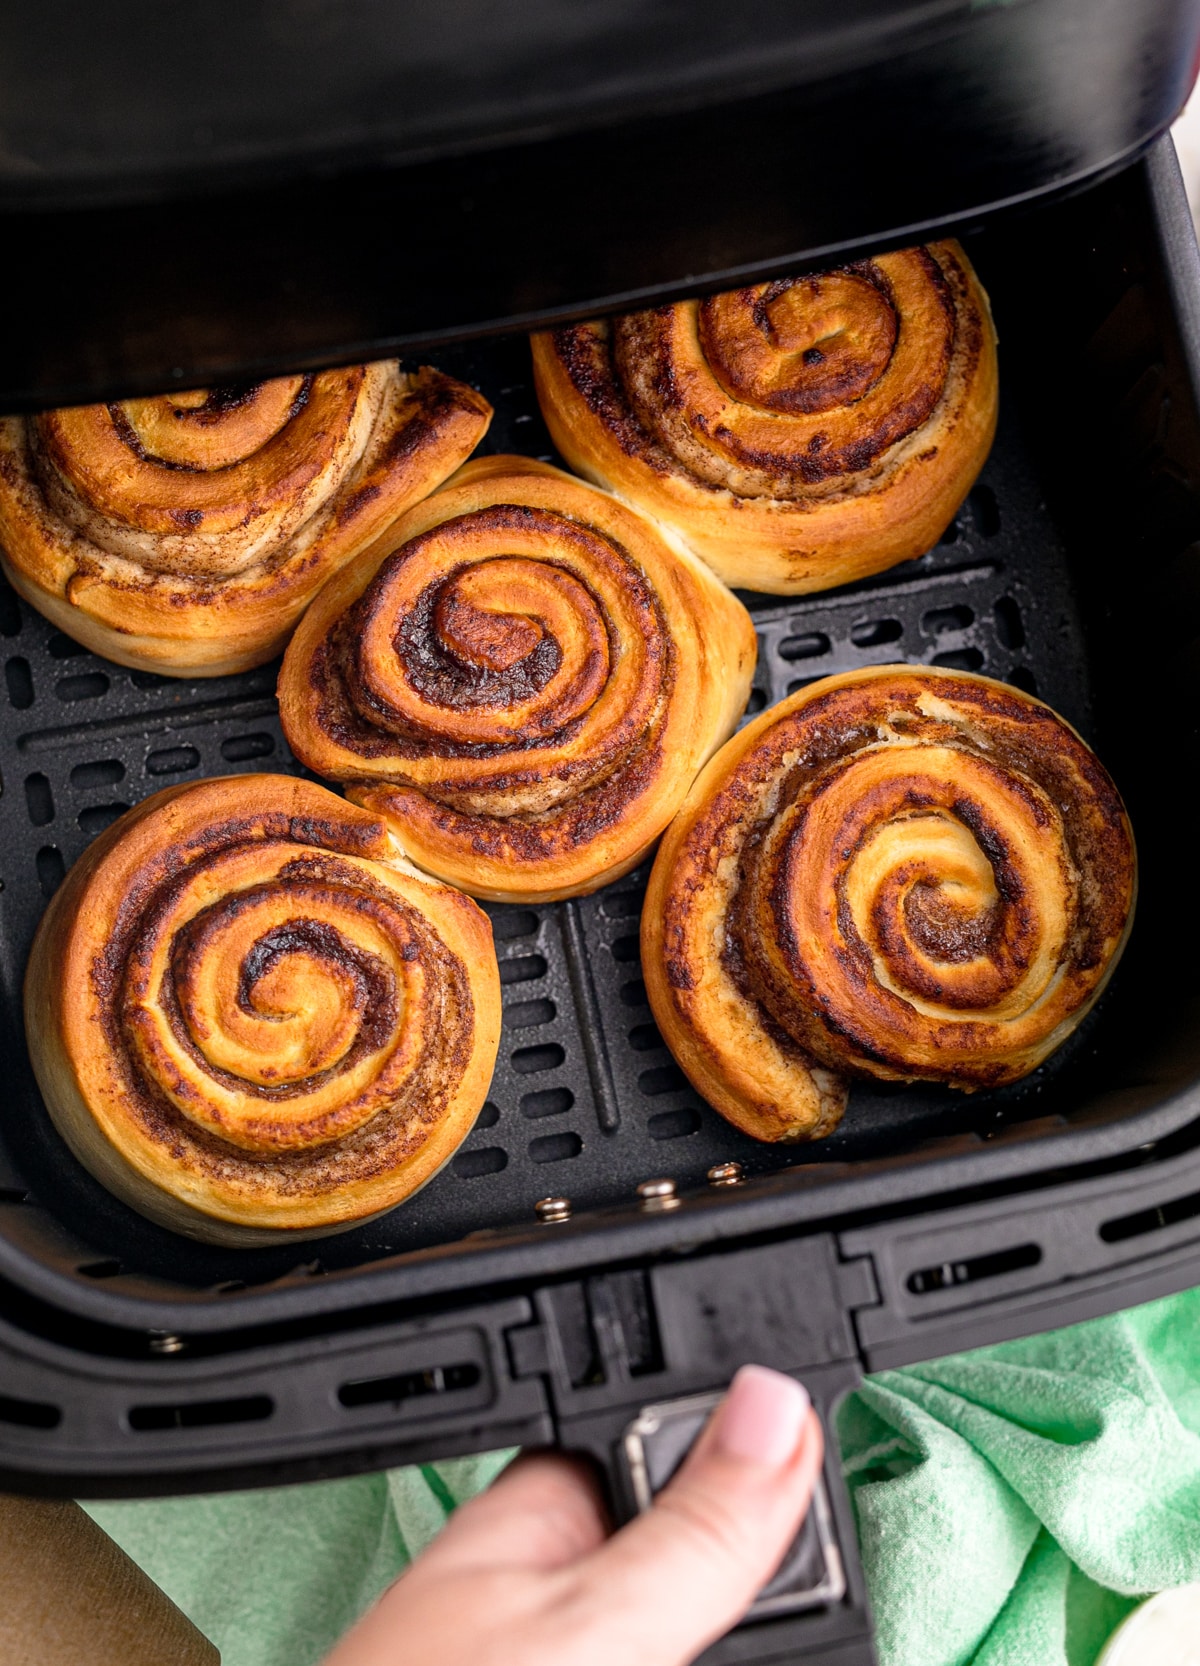 Air fryer being opened with a view of the cooked cinnamon rolls in the basket from above.